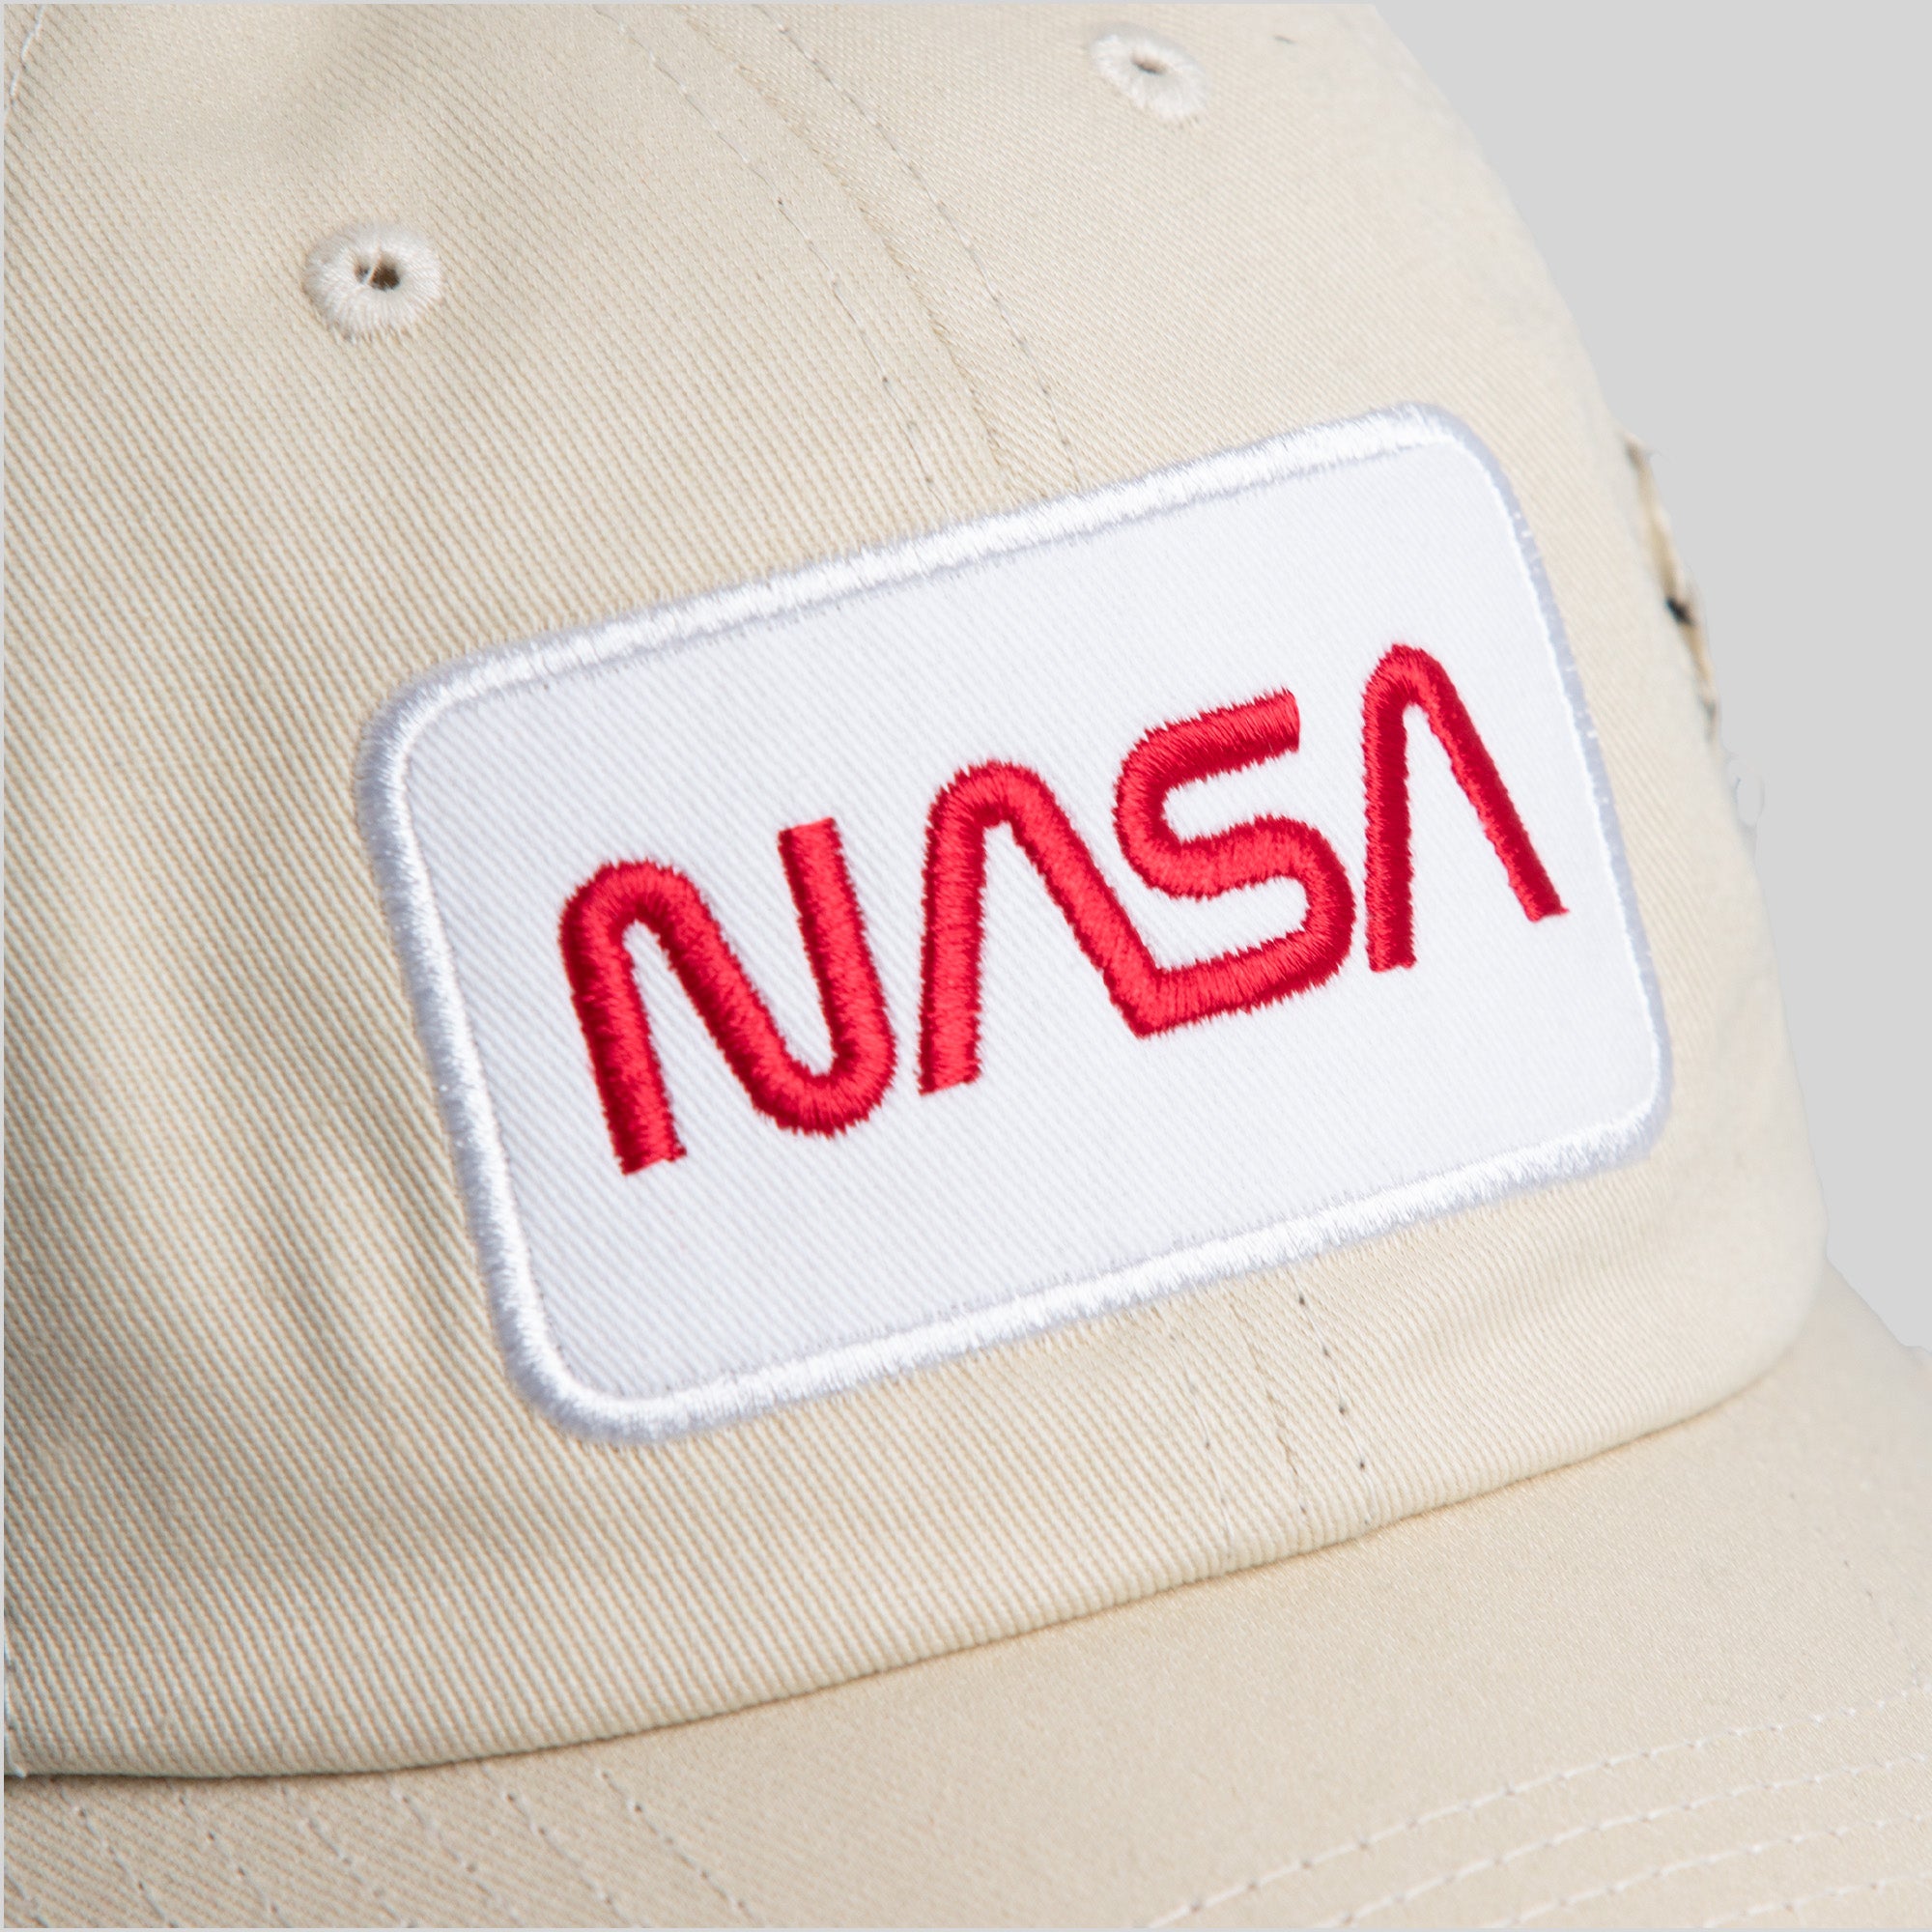 SKYLAB NASA 25TH ANNIVERSARY SAND RELAXED FIT DISTRESSED HAT